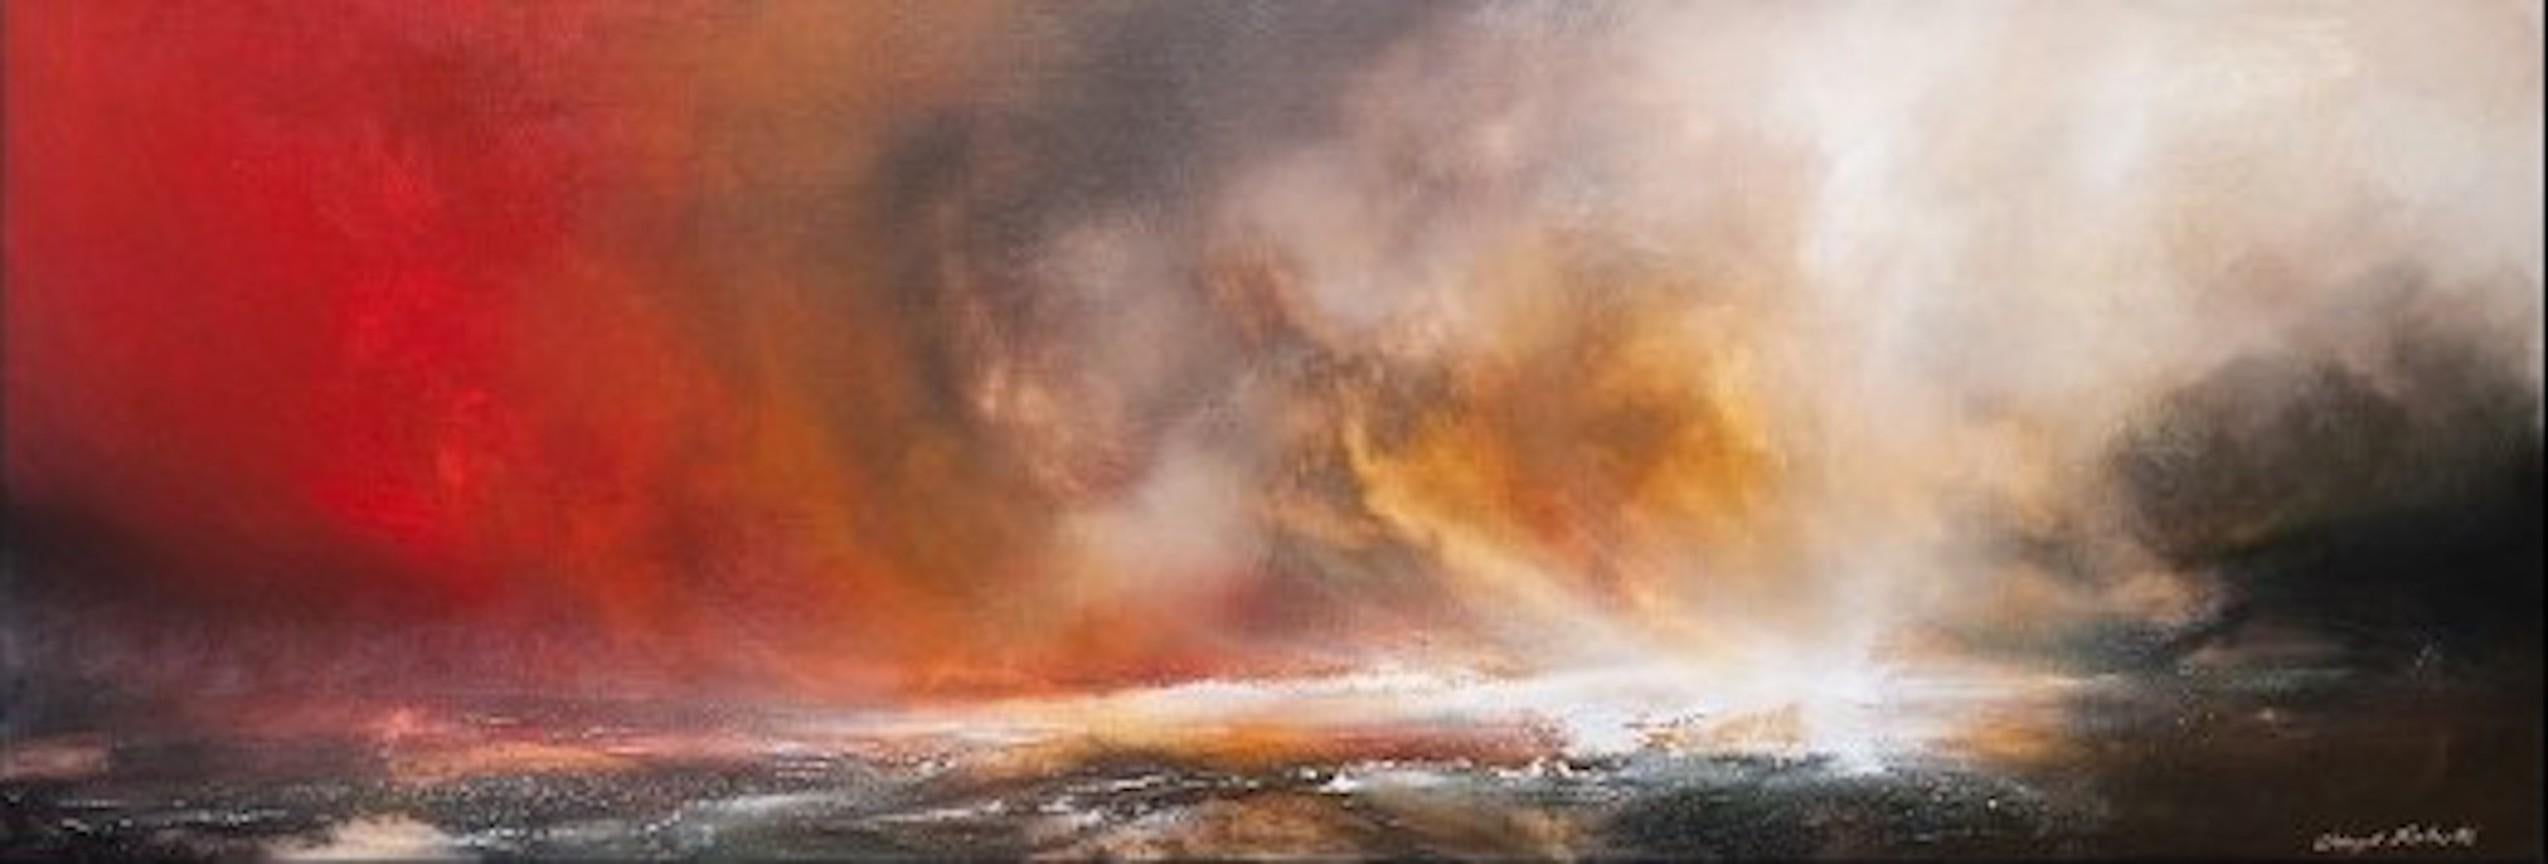 The Royal Storm, Original Skyscape Painting, Contemporary Statement Art 